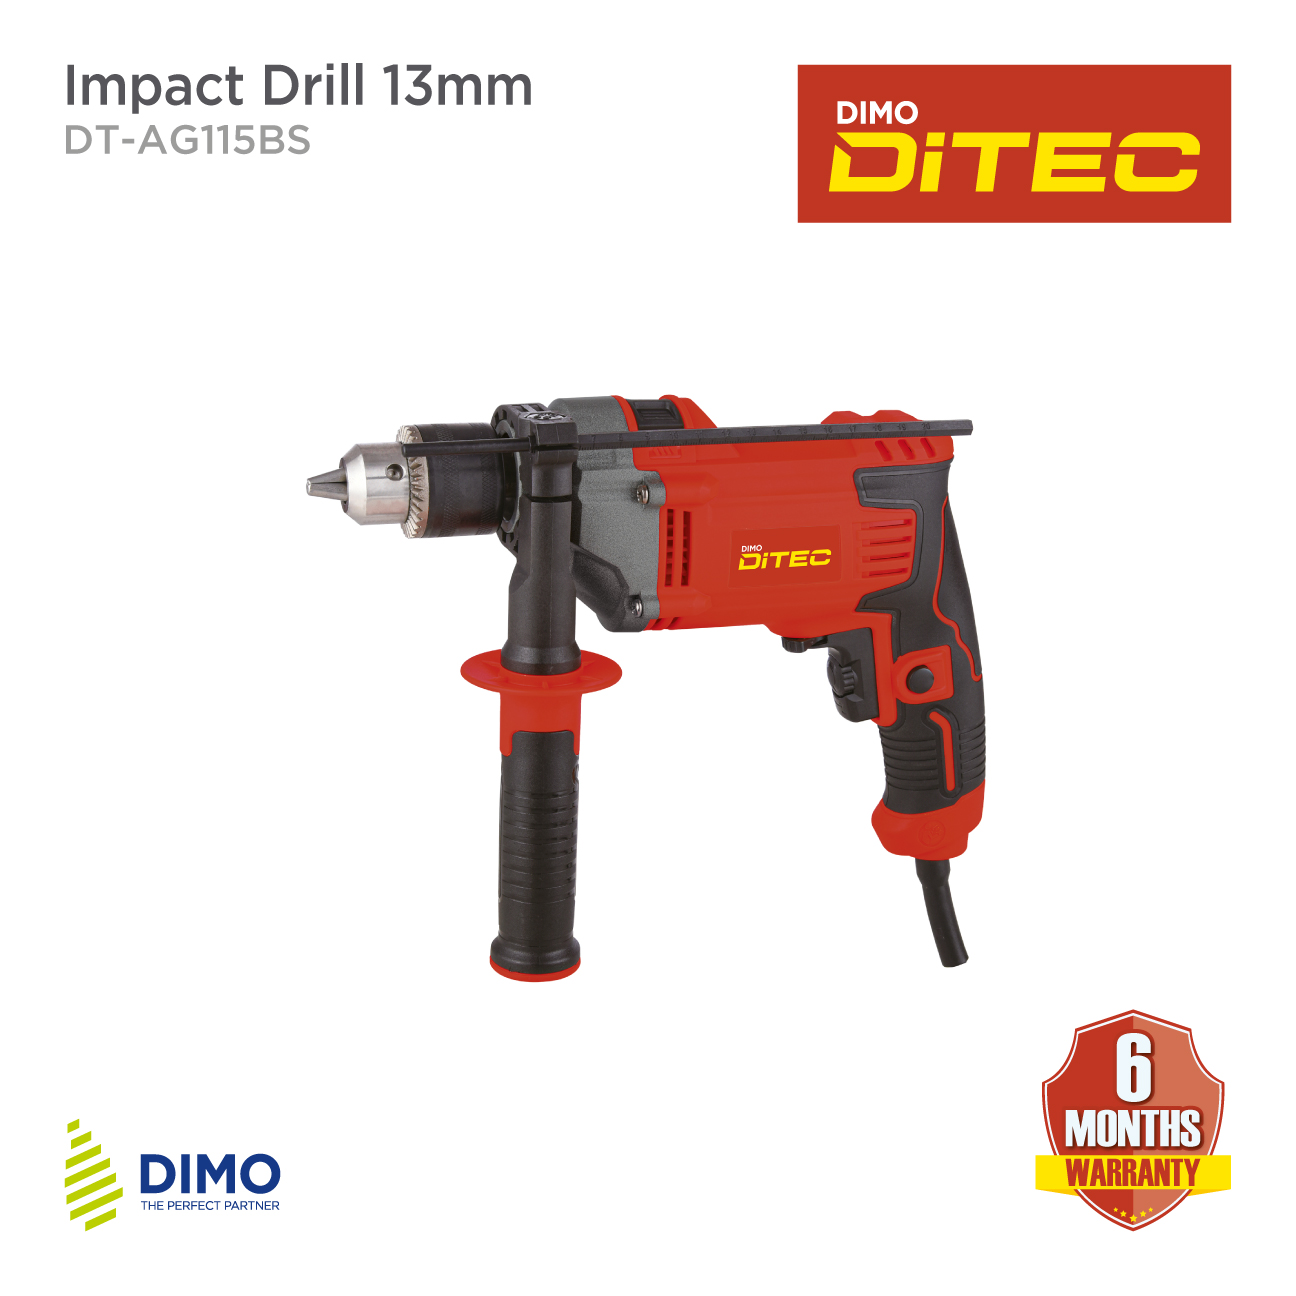 Impact-drill-13mm_DT-AG115BS